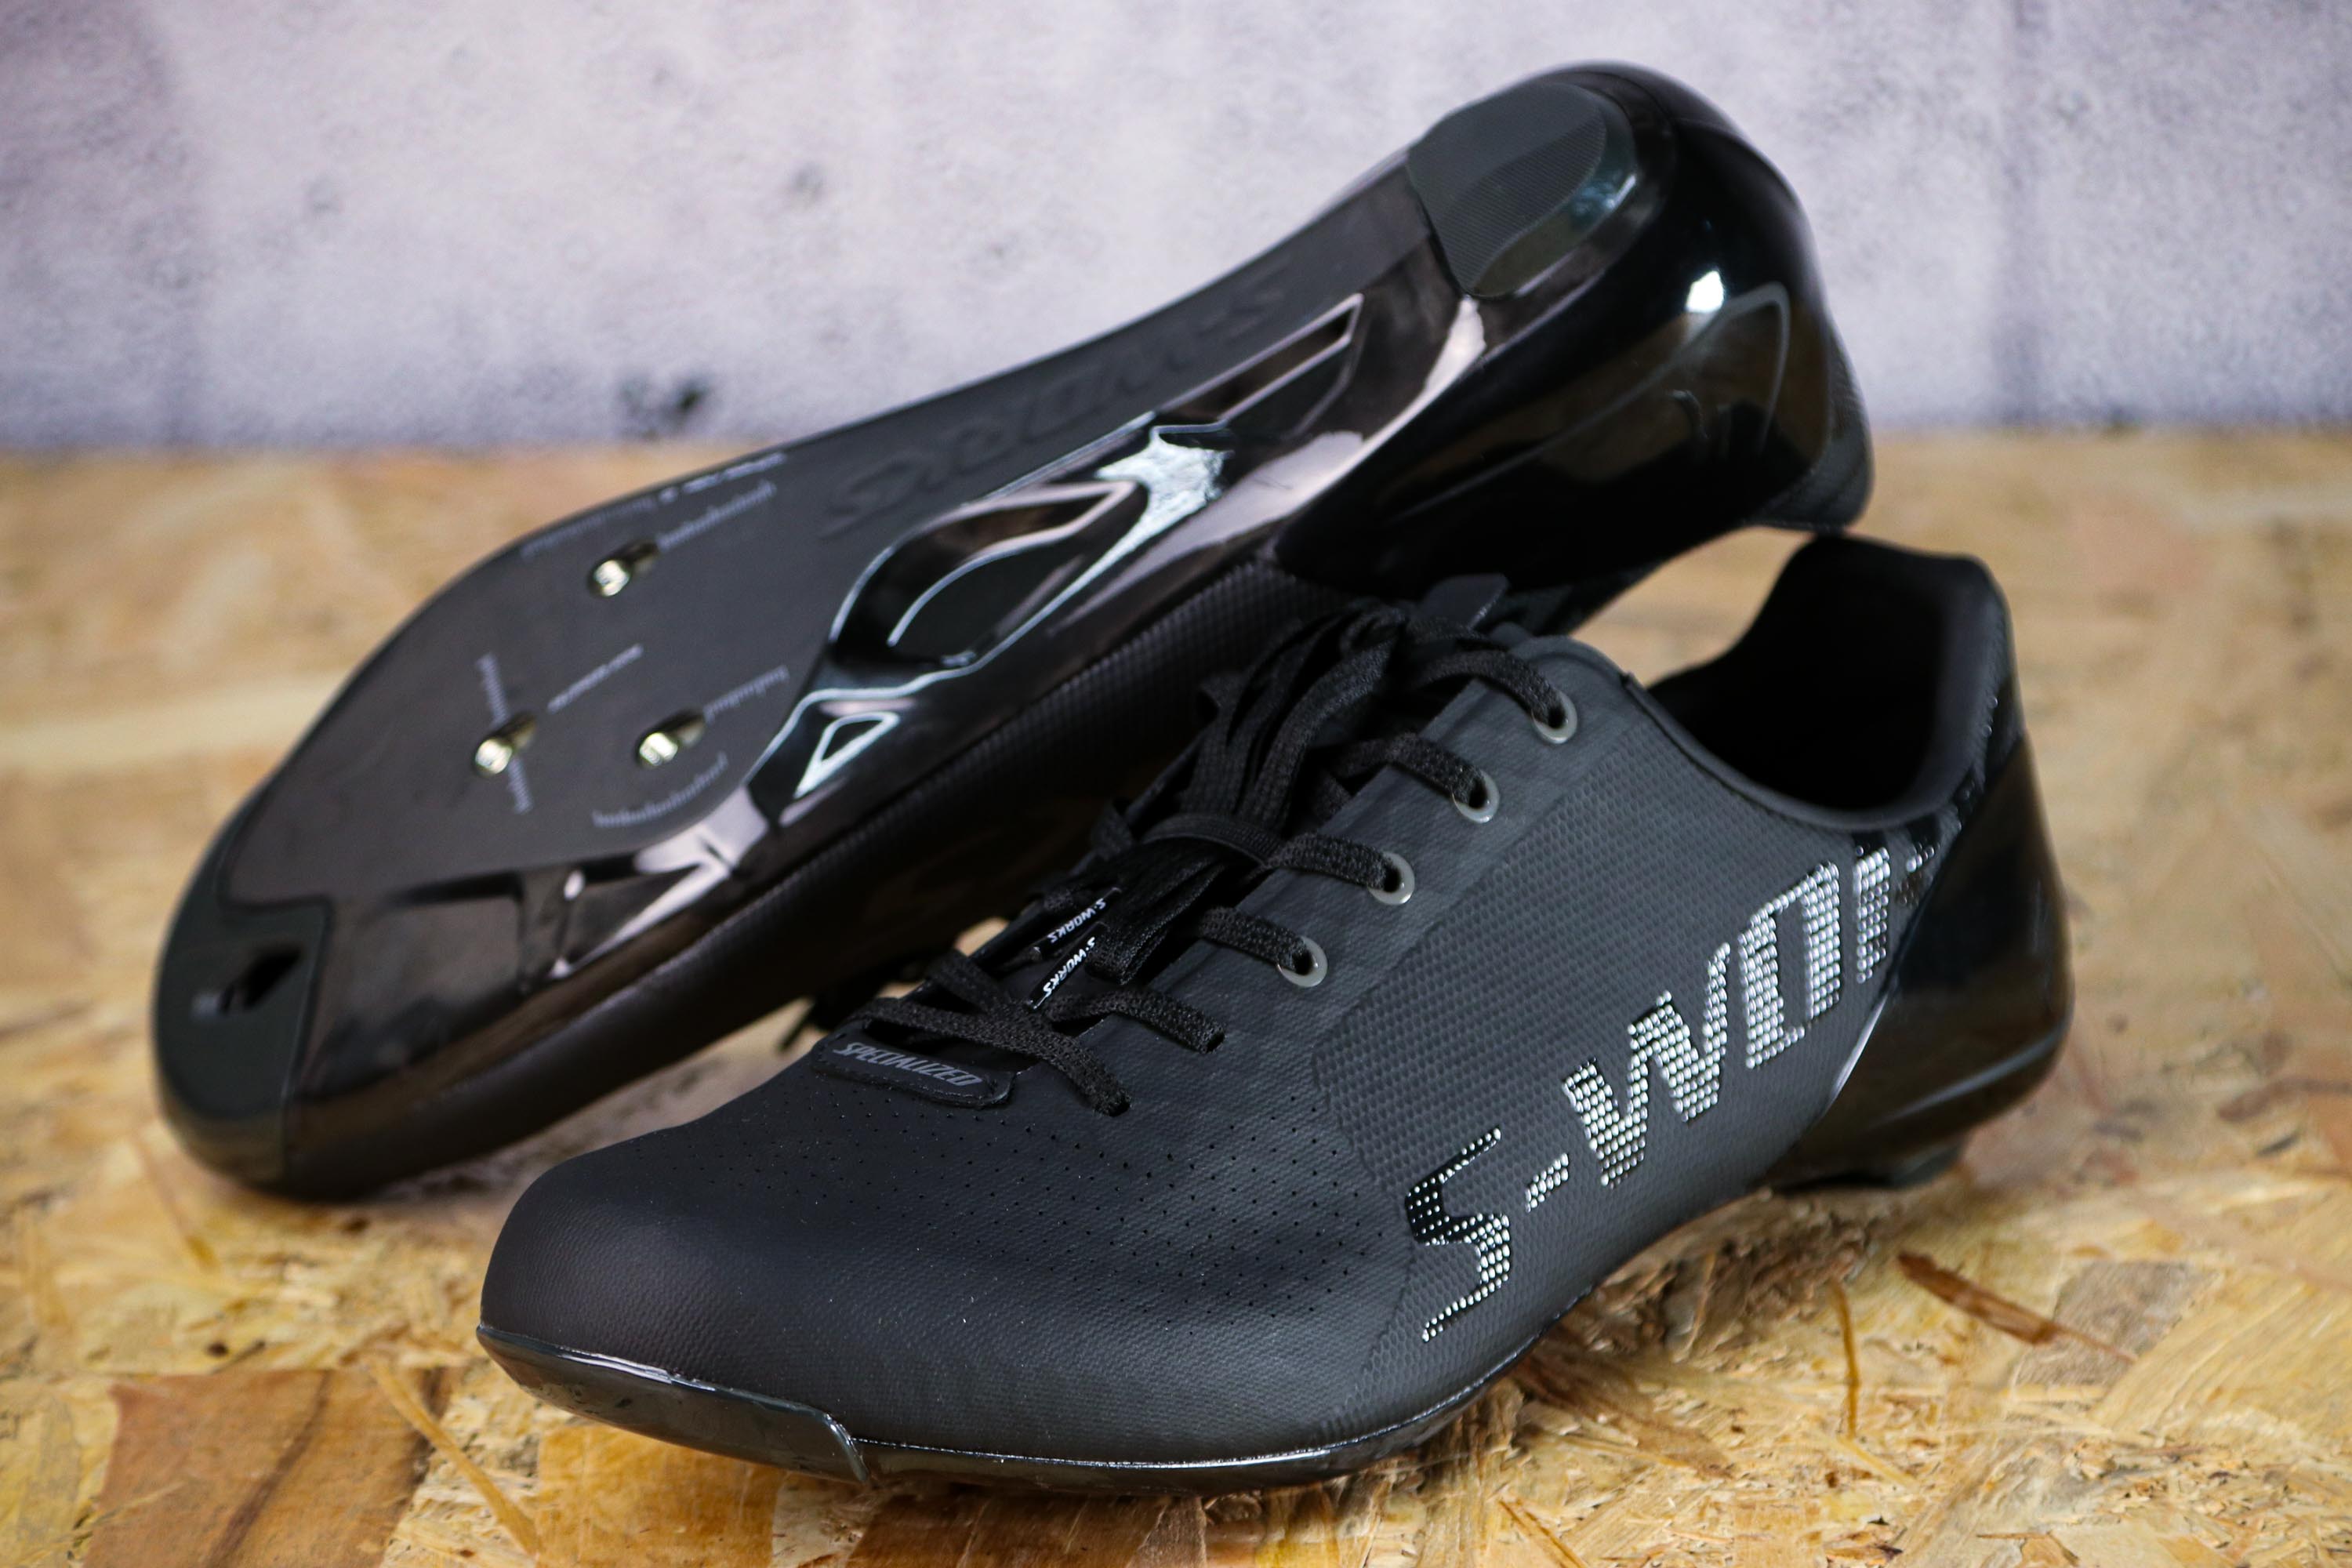 Review: Specialized S-Works 7 Lace Road Shoes | road.cc